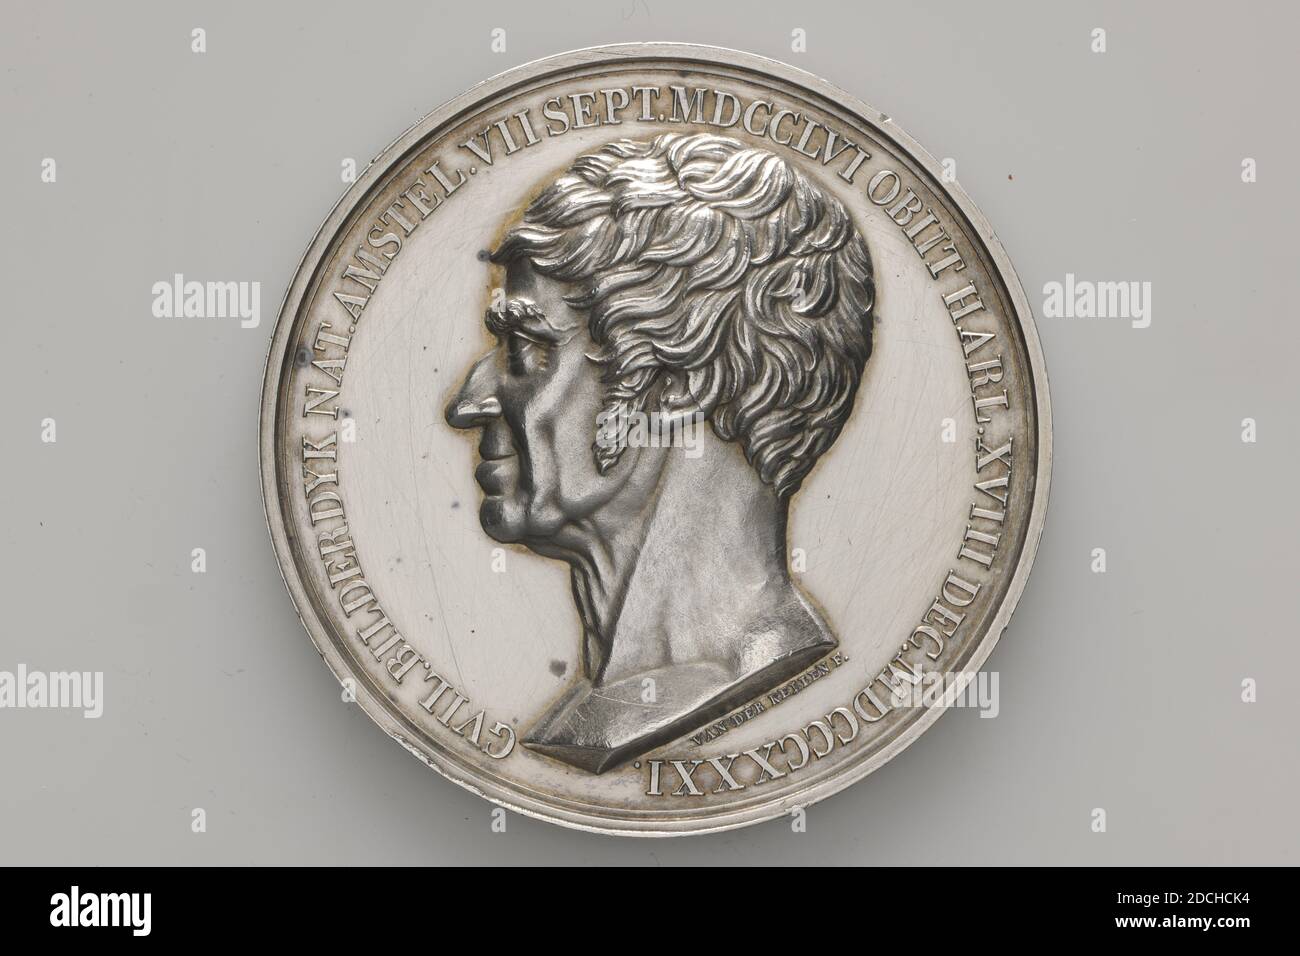 medal, David van der Kellen II, 1854, minted, General: 5.3 x 0.5cm (53 x 5mm), Weight: 78.8g, man's portrait, head, Bronze medal, minted in honor of Willem Bilderdijk from 1854. On the front shows the head of Bilderdijk, and is used to the left in profile. The medal contains the inscription: GVIL. BILDERDYK. WET. AMSTEL. VII SEPT. MDCCLVI OBIIT HARL. XVIII DEC. MDCCCXXXI. The medal is marked at the bottom of the head: VAN DER KELLEN F .. On the back is a laurel wreath, tied at the bottom. It contains the inscription SECVLI SVI DECVS, 1892 Stock Photo